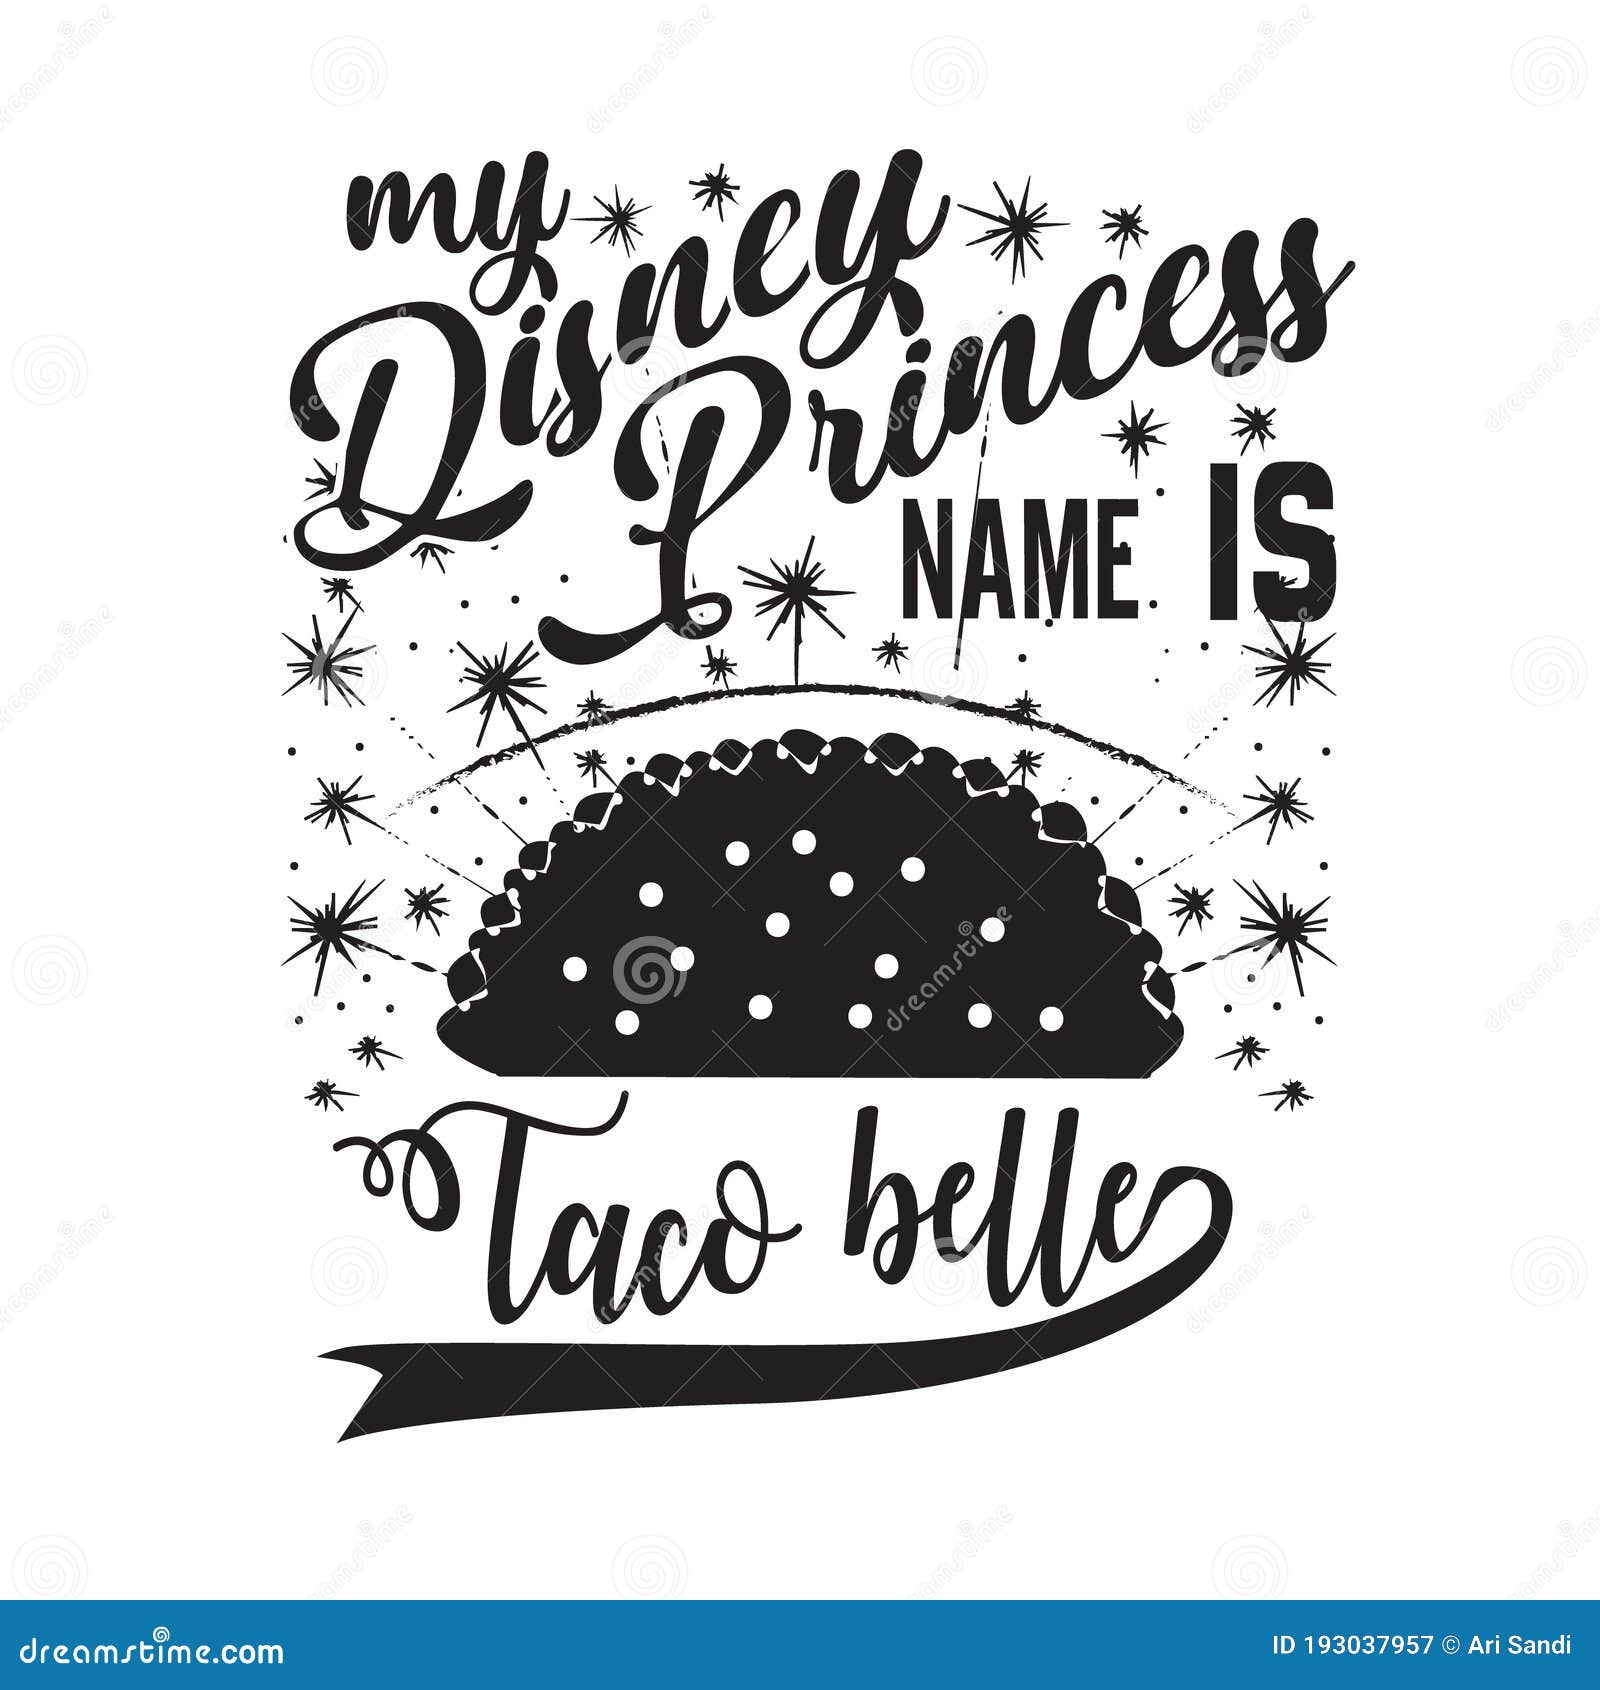 Tacos Quote Good For Cricut. My Disney Princess Name Is ...